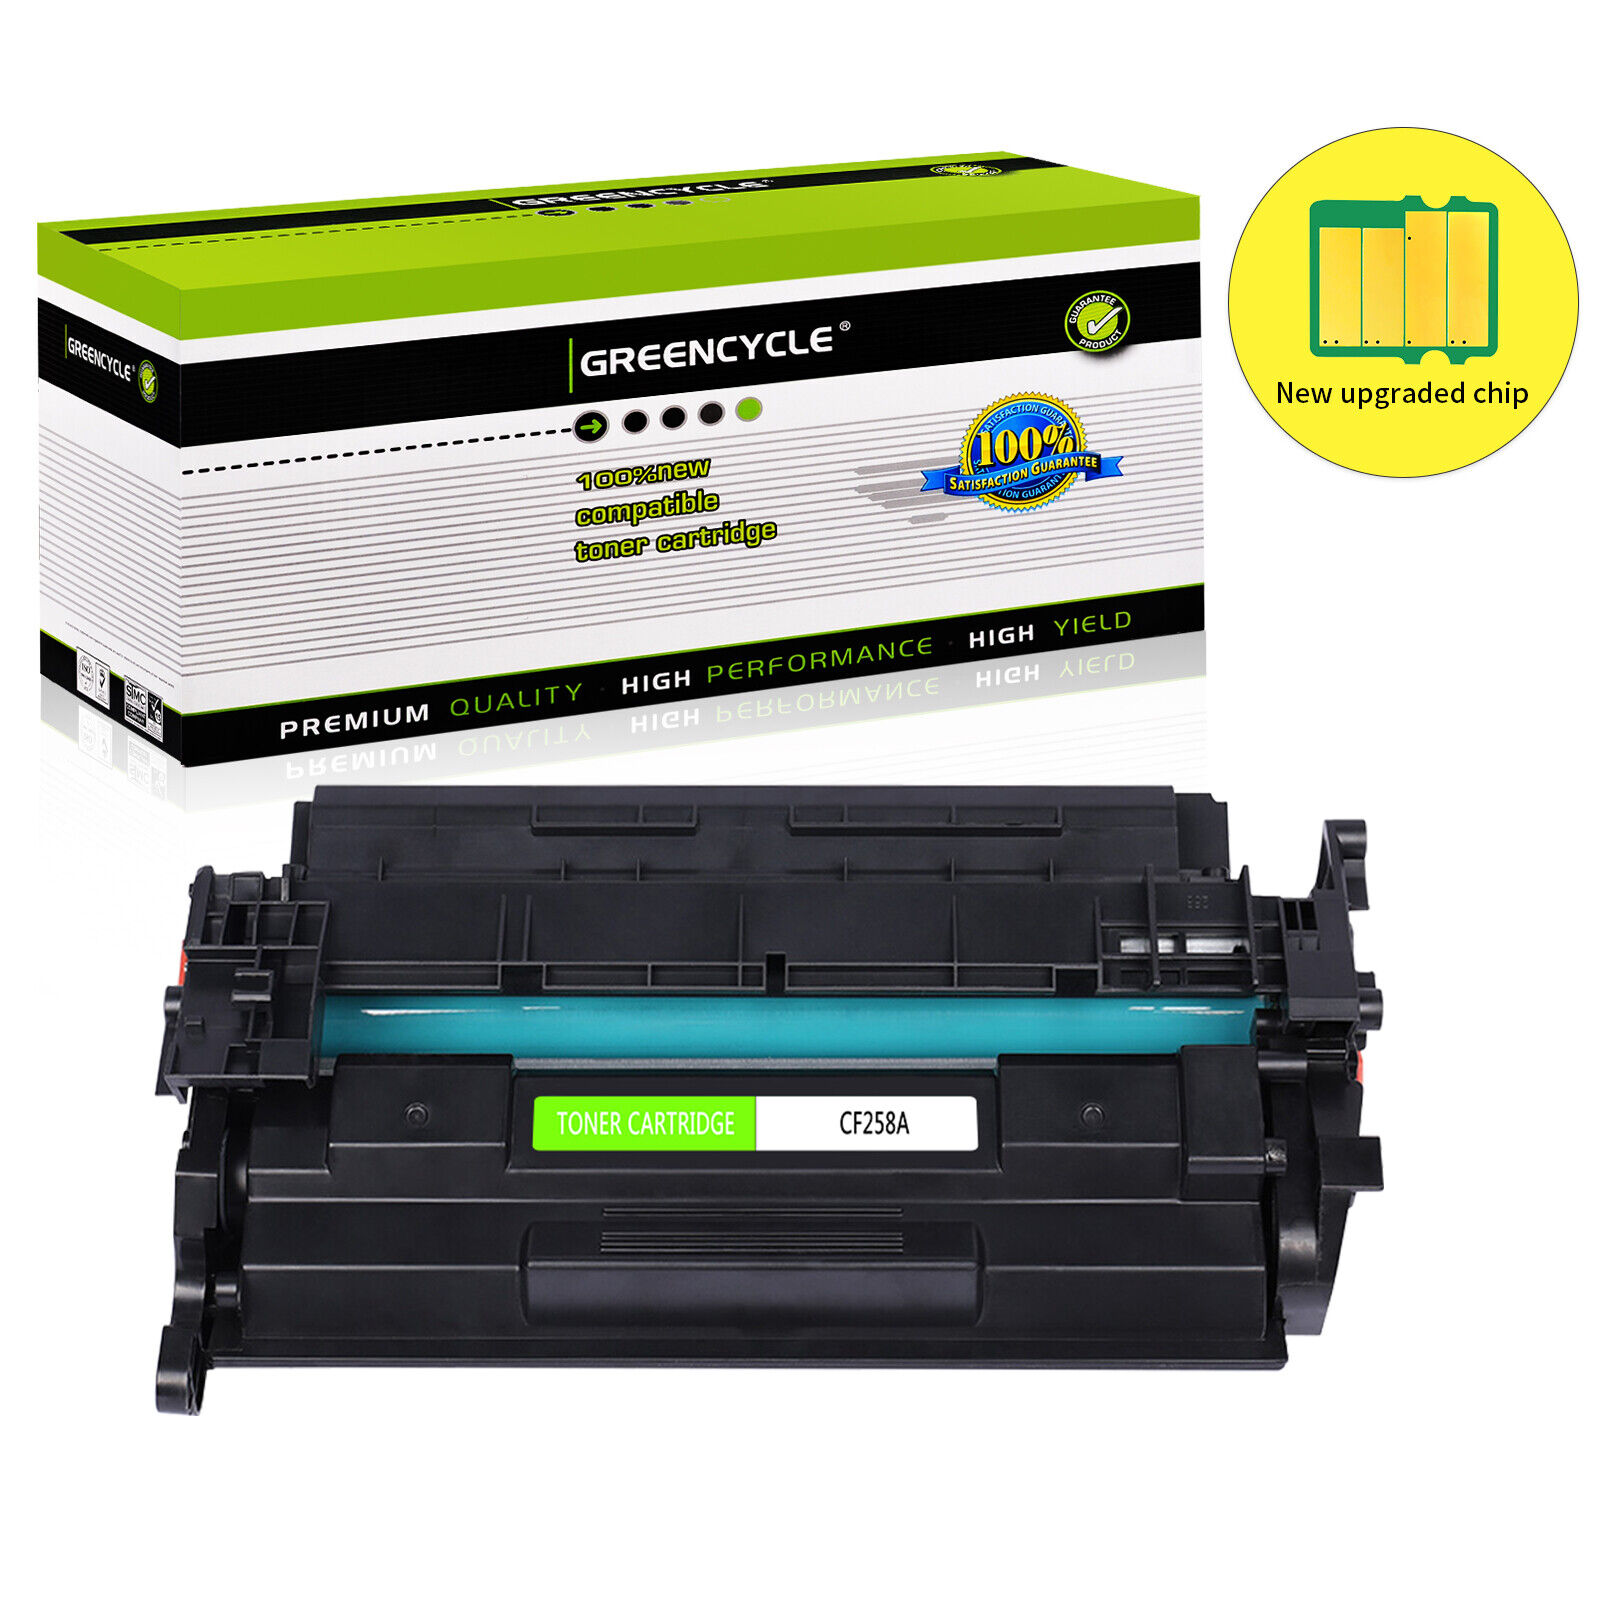 CF258A Toner for HP 58a LaserJet Pro M404n M404dw MFP M428fdn M428dw with Chip